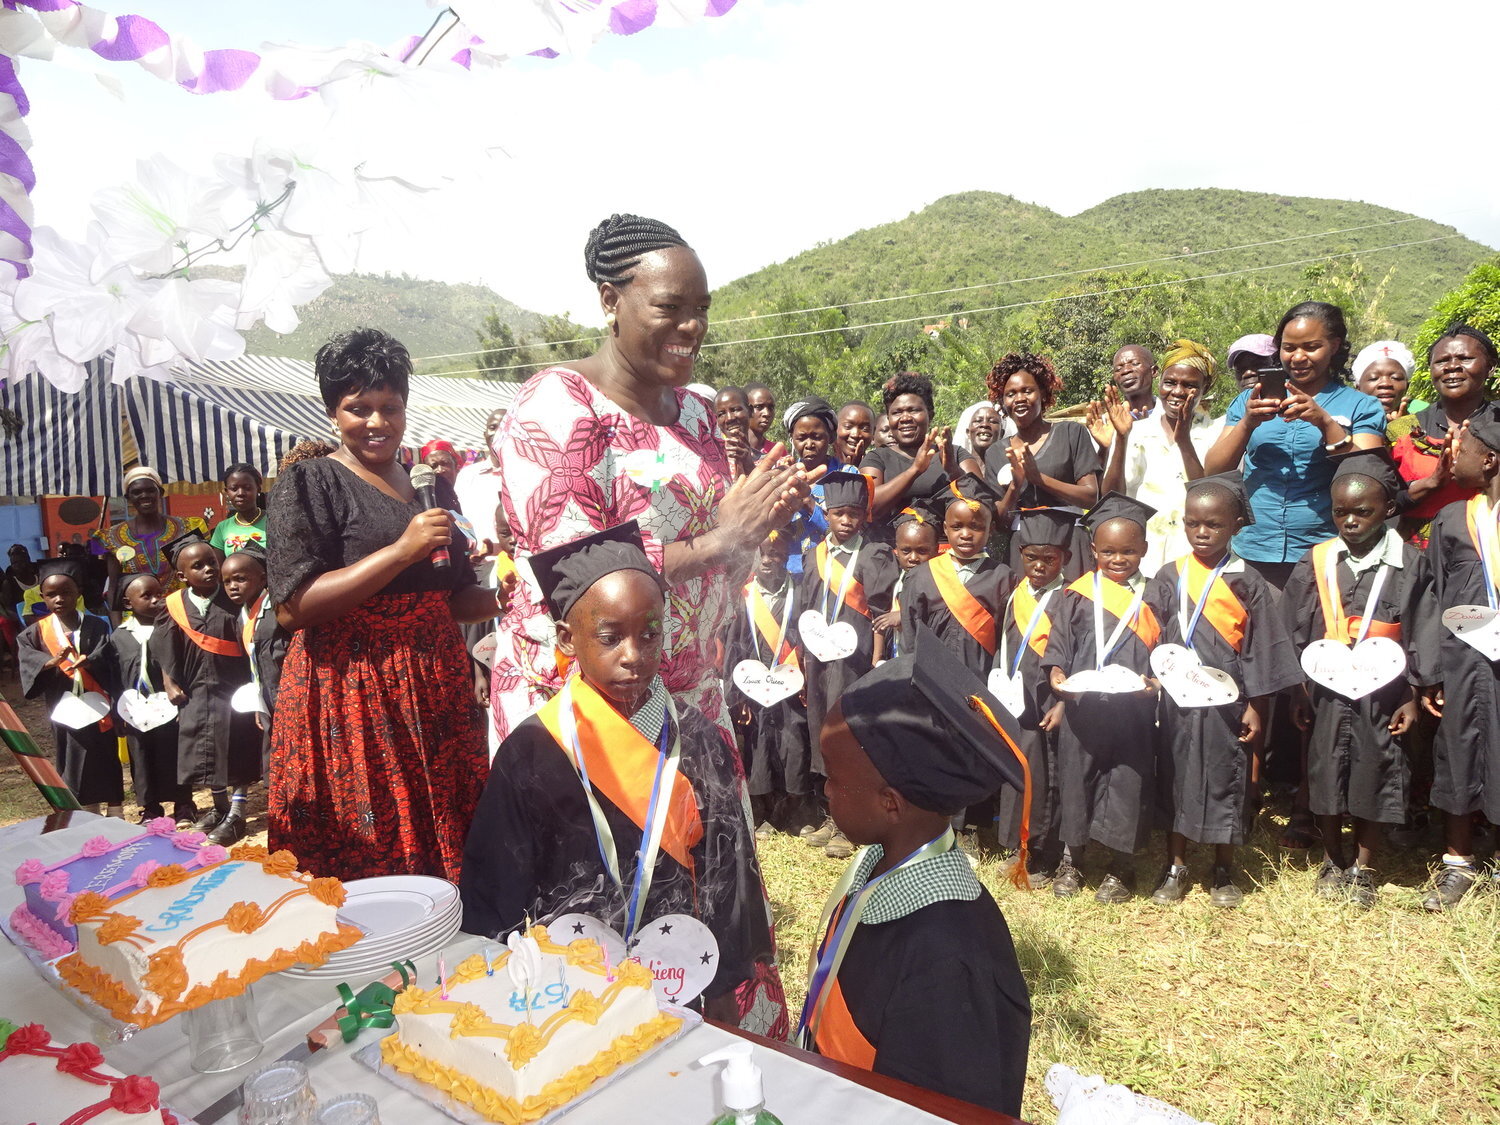 Two young students in graduation regalia stand next to a table with decorated cakes on it while two women clap and an audience including other child graduates looks on